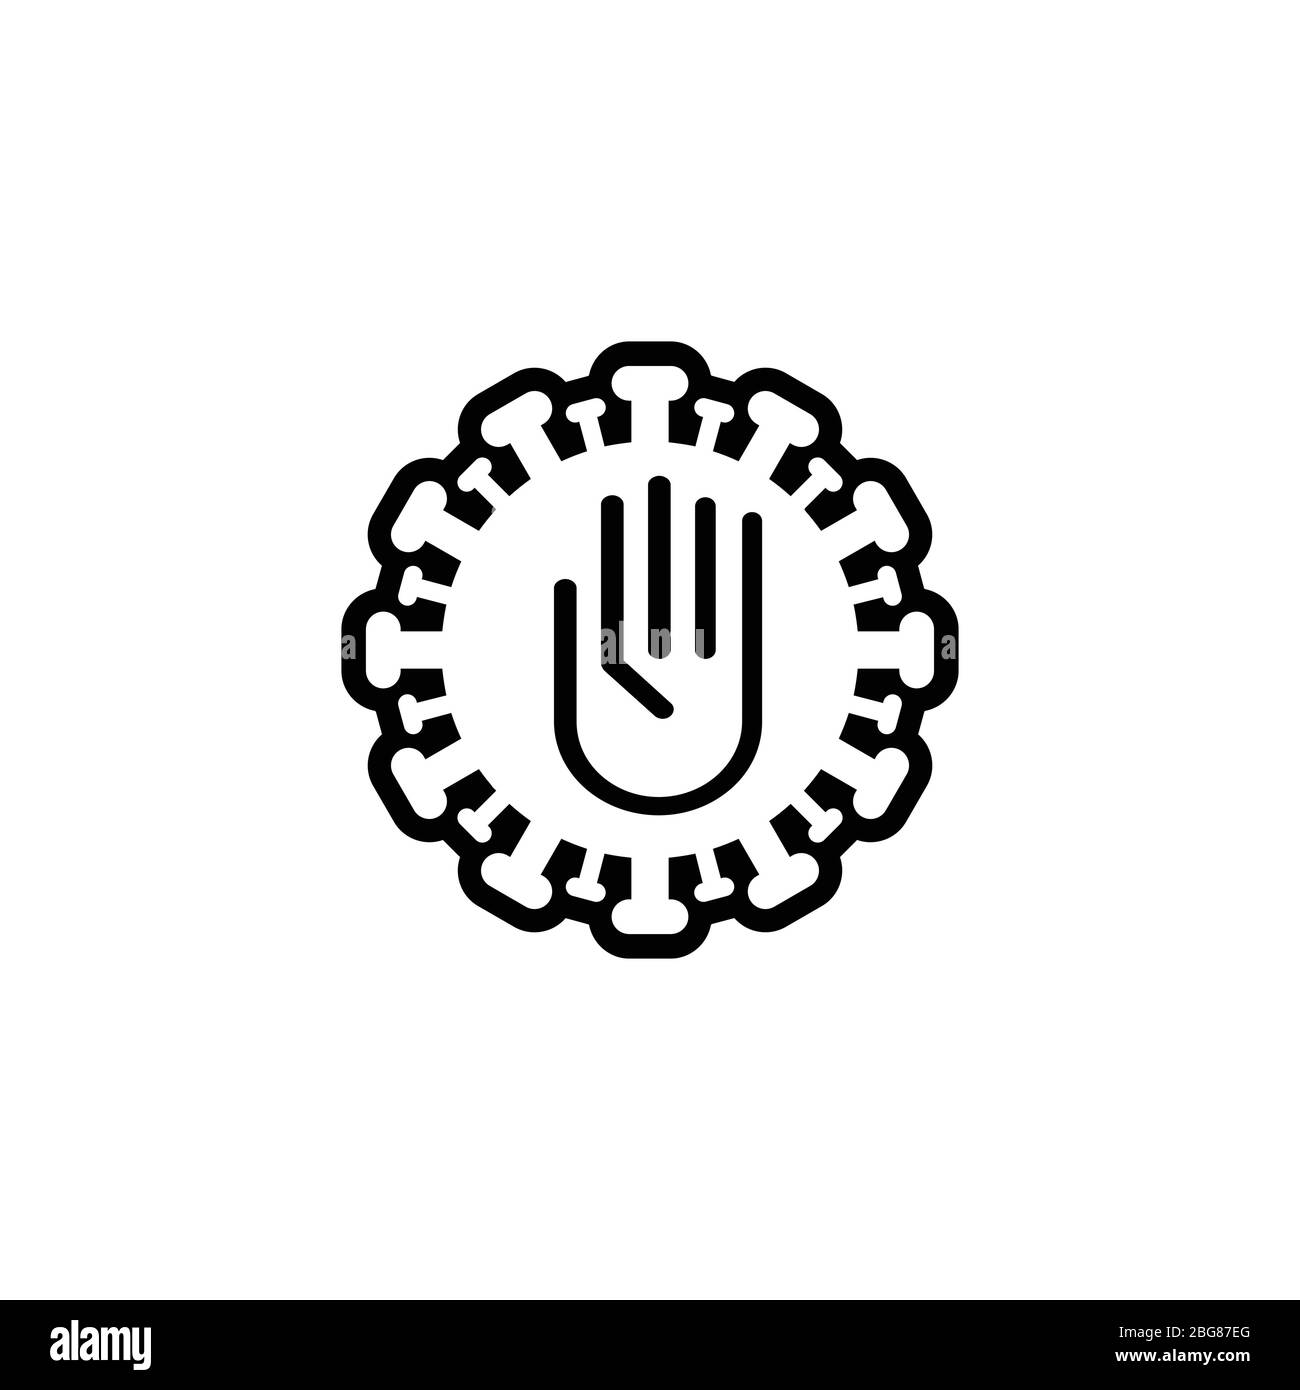 DON'T TOUCH vector icon. warning sign of virus danger, virus prohibition sign icon. symbol, vector graphic. Stock Vector